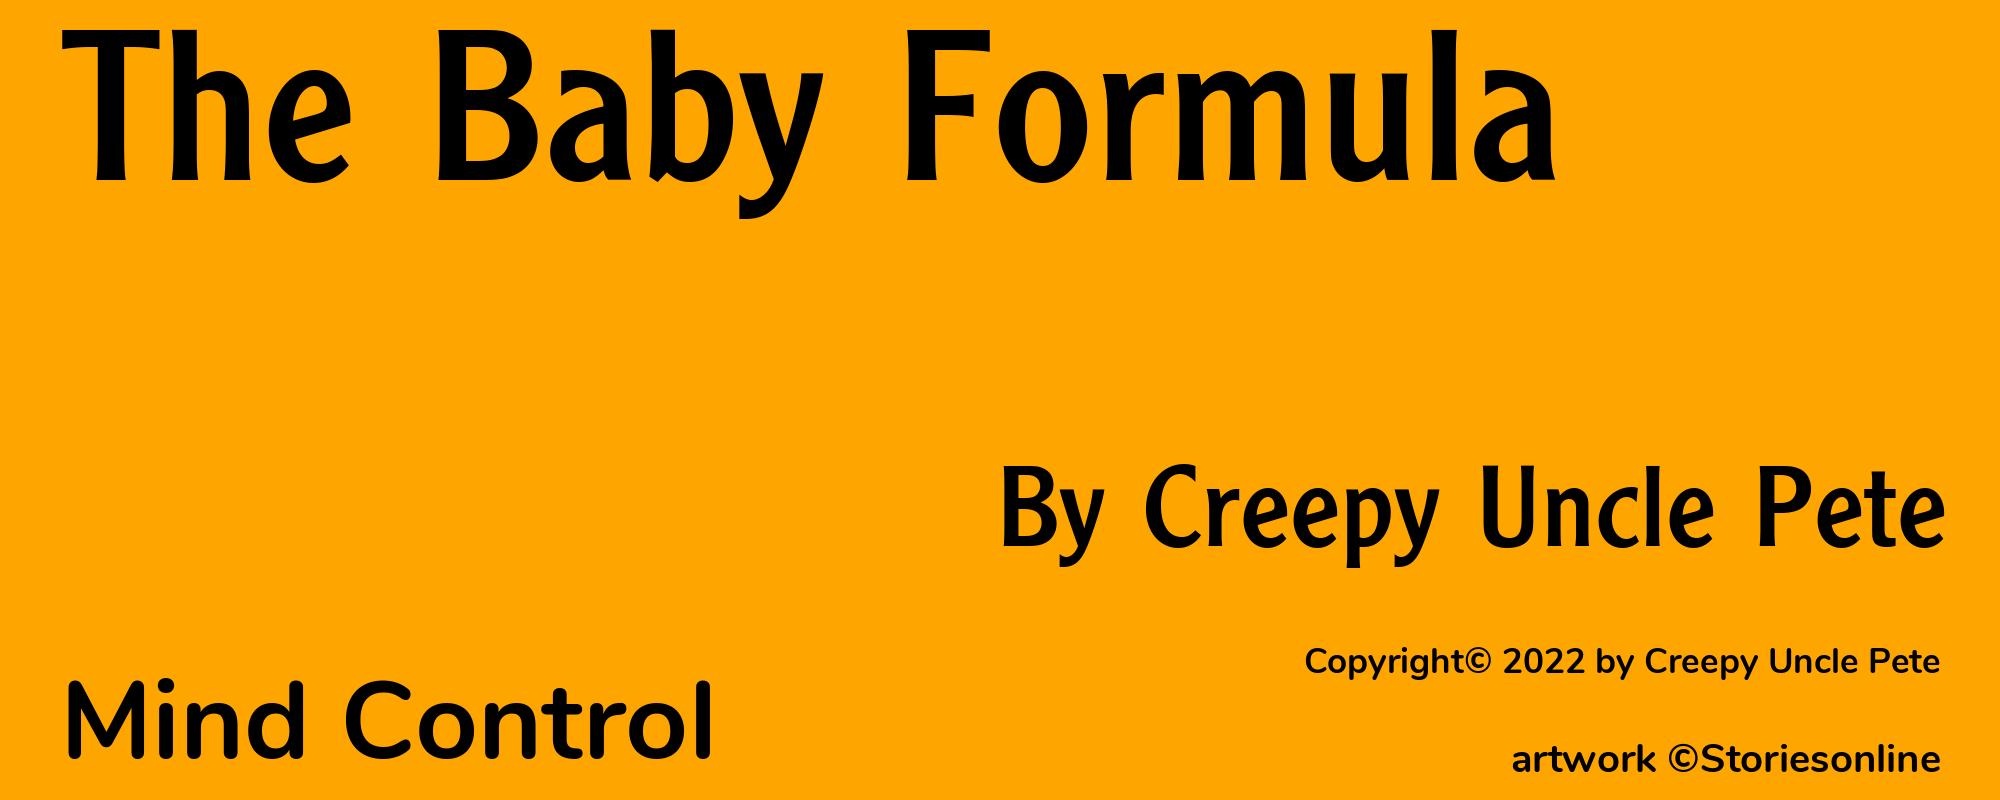 The Baby Formula - Cover